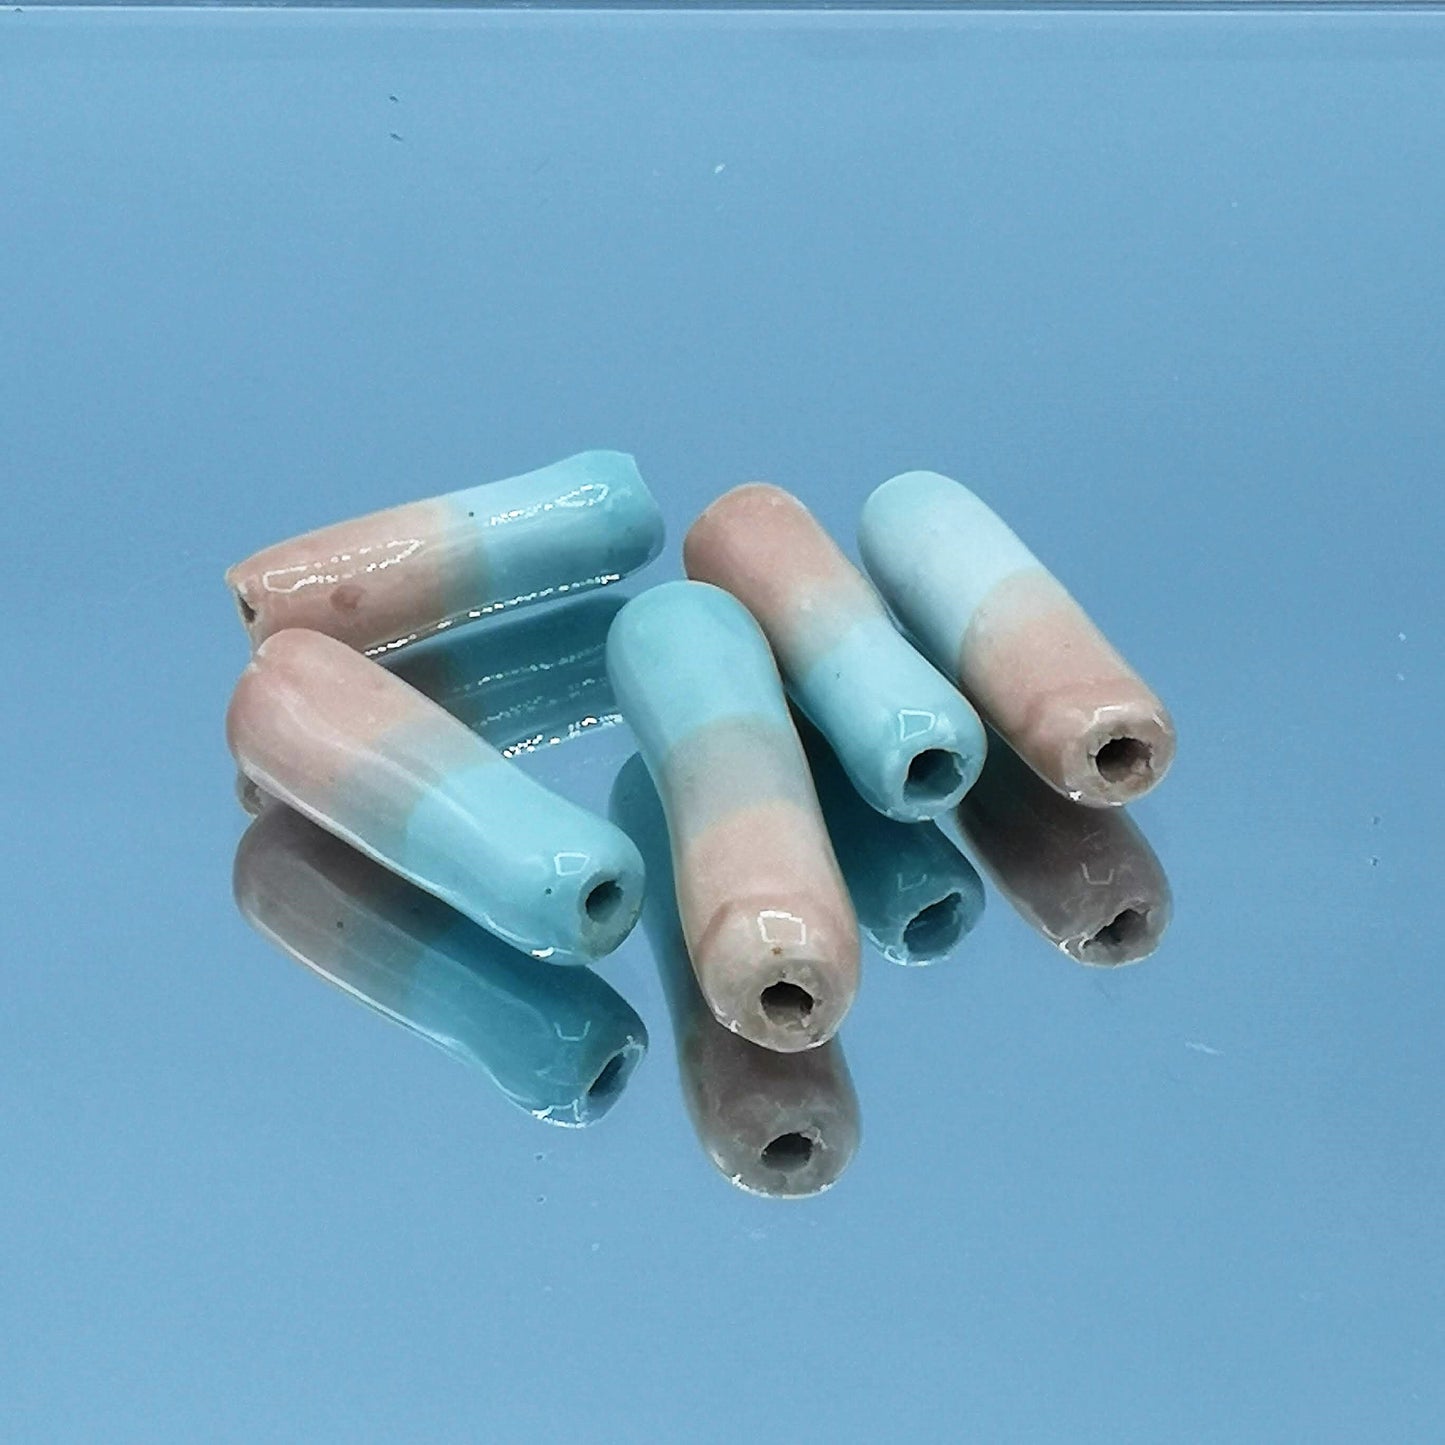 5Pc LONG TUBE BEADS For Jewelry Making, Clay Spacer Beads, Unique Ceramic Macrame Beads Handmade, Best Sellers - Ceramica Ana Rafael